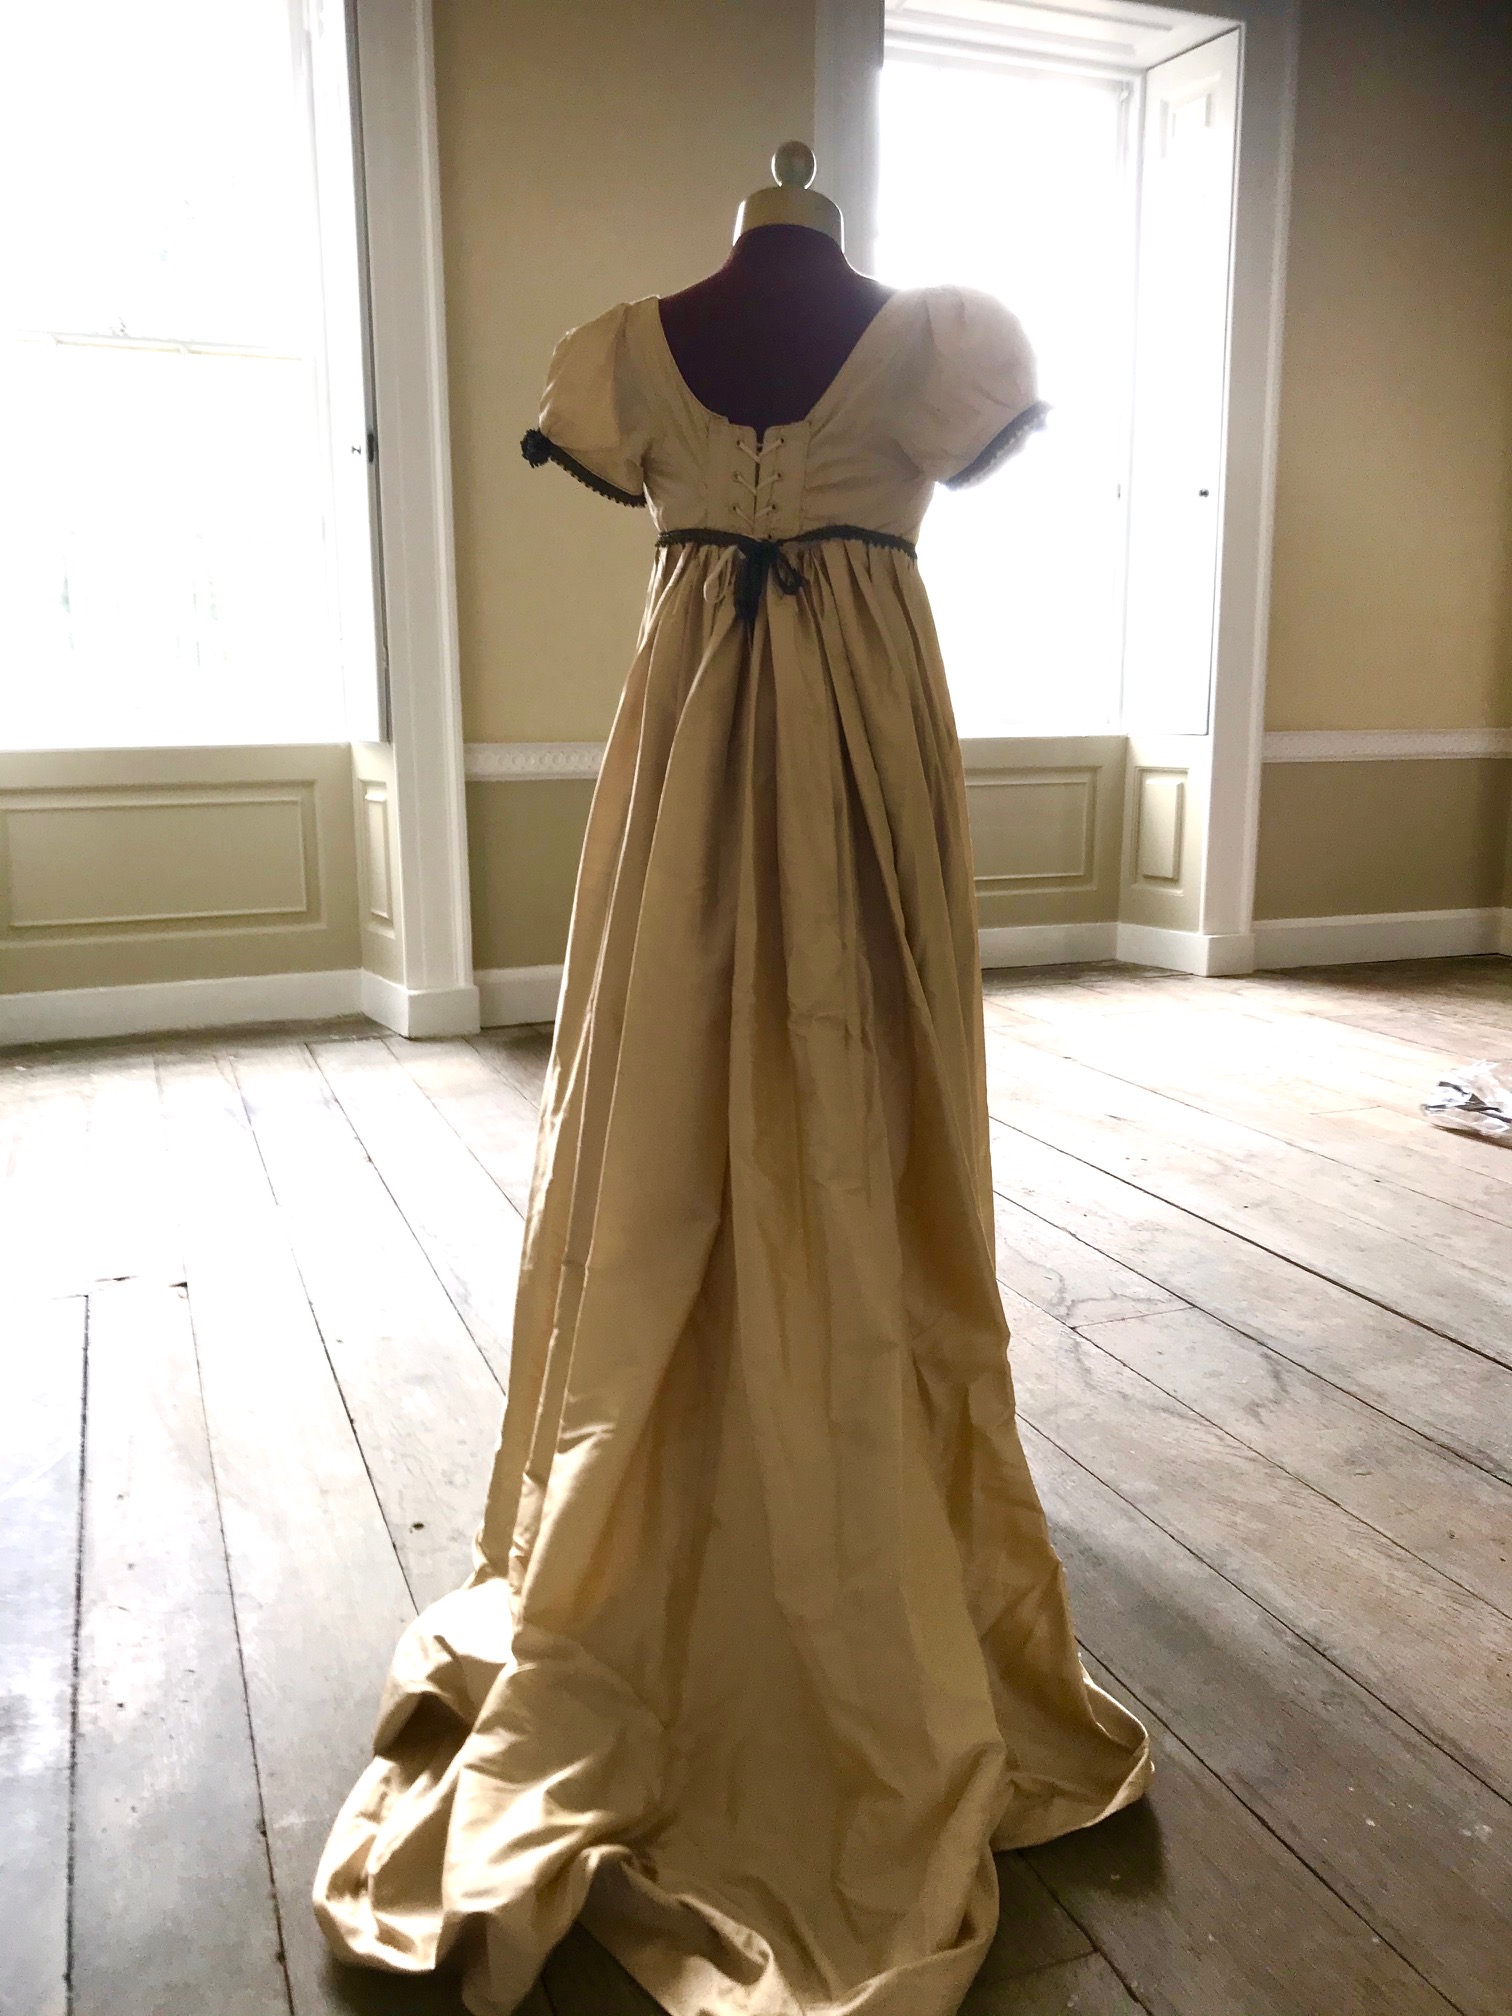 A lady's Regency style day dress in cream silk with black lace trim (lacing at back). Ex London Festival Opera 'Cosi fan tutte'